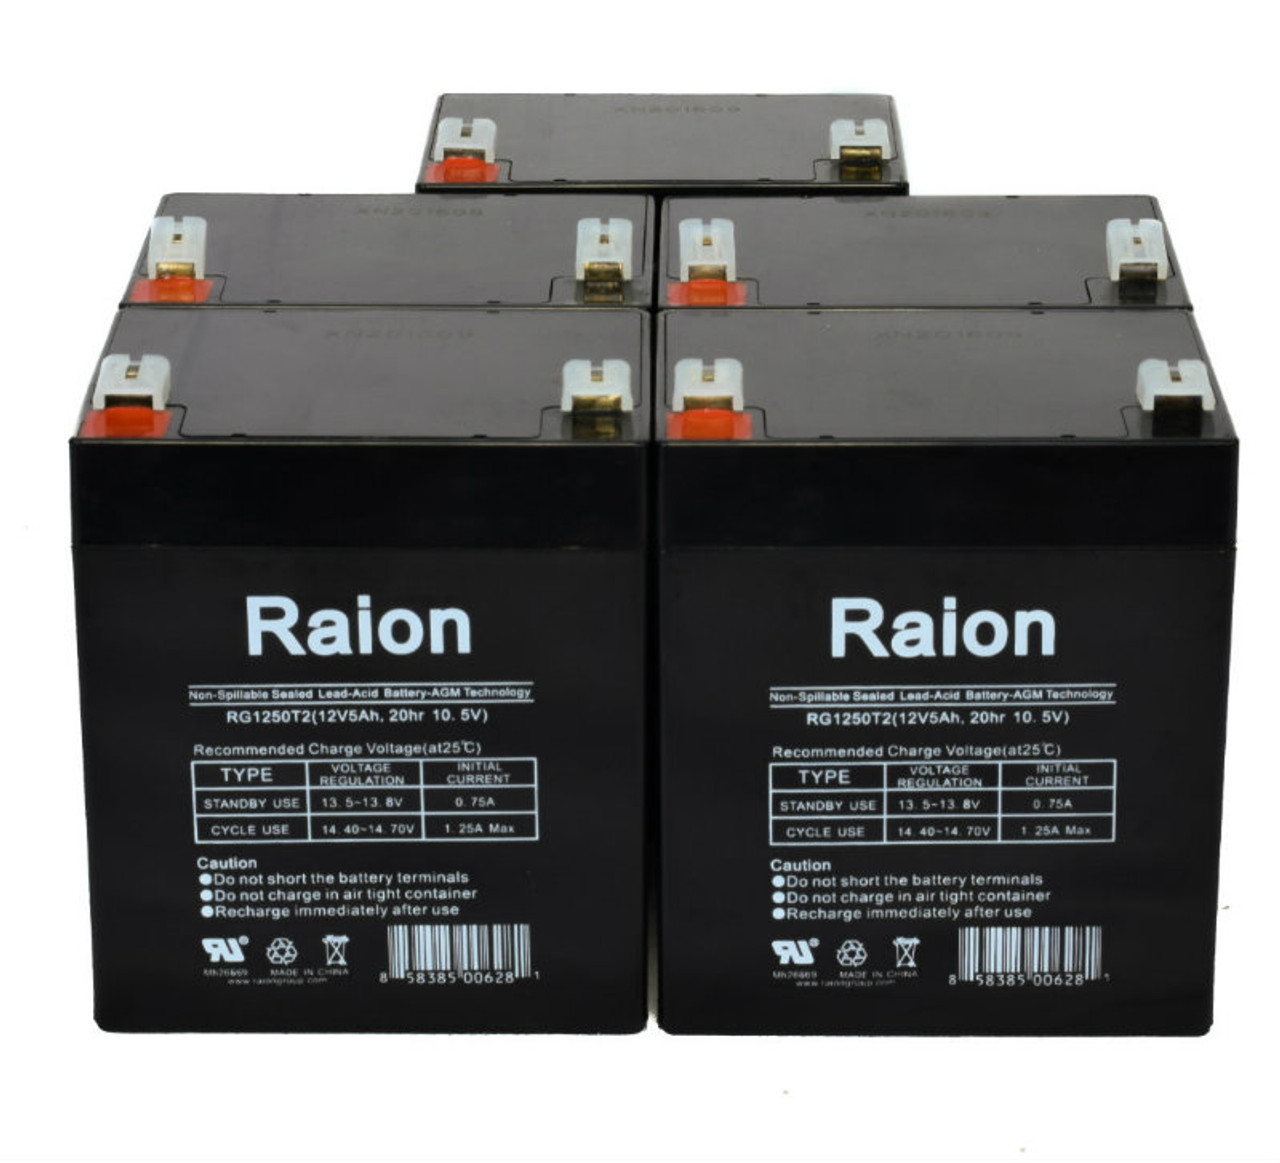 Raion Power 12V 5Ah RG1250T2 Replacement Lead Acid Battery for Telong TL1240A - 5 Pack